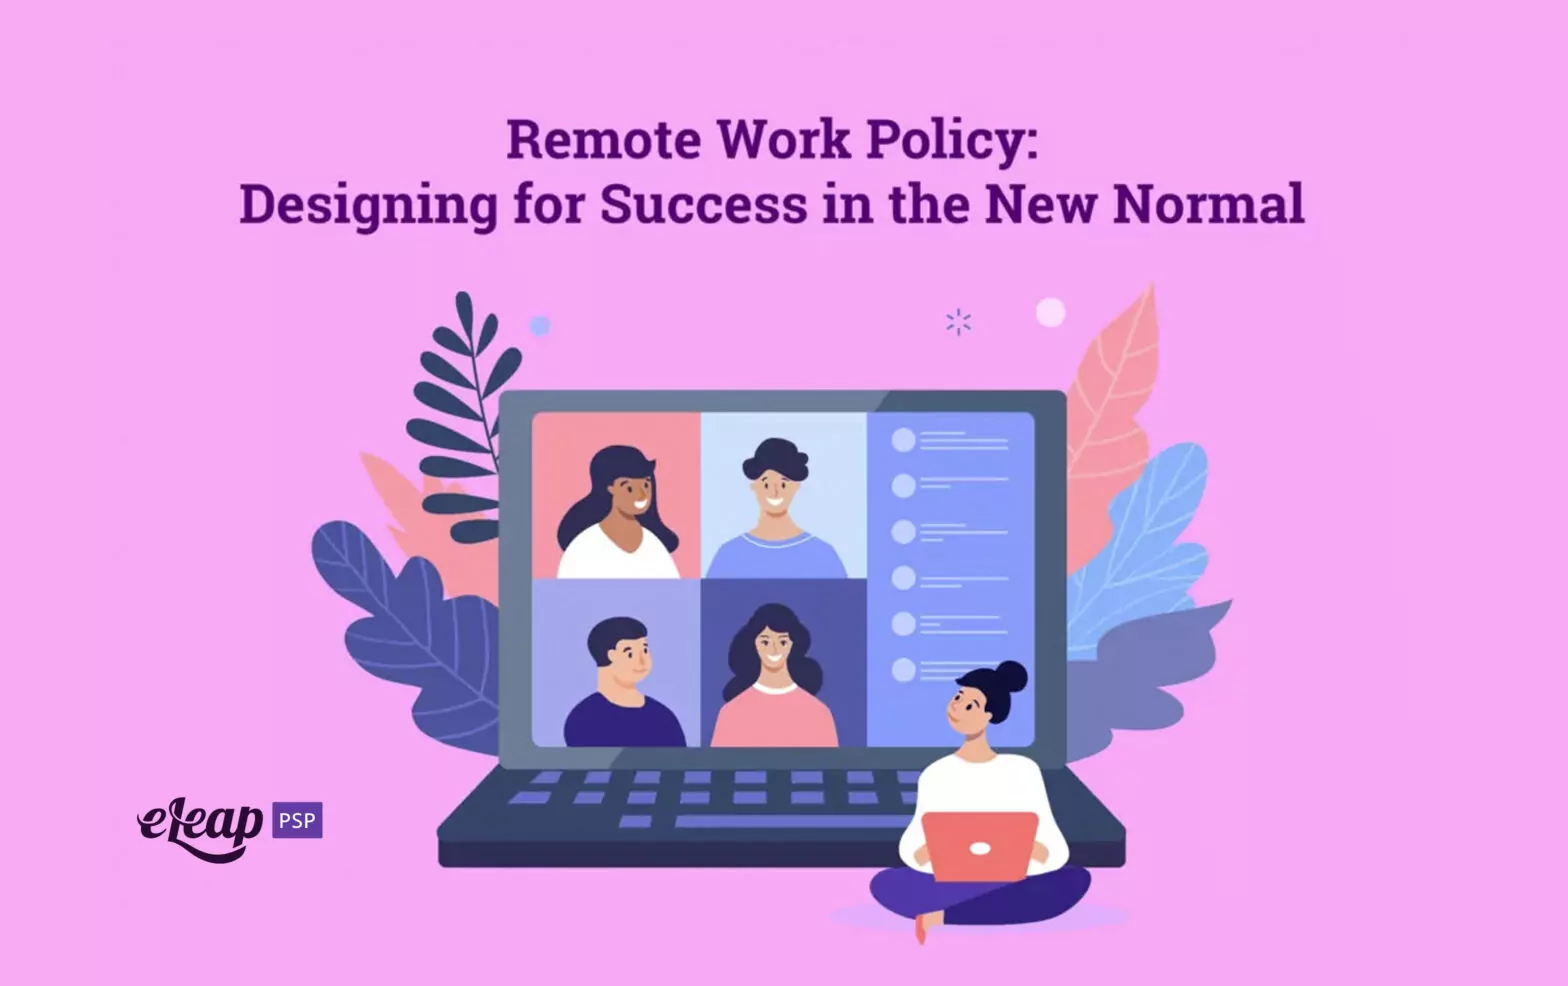 Remote Work Policy: Designing for Success in the New Normal